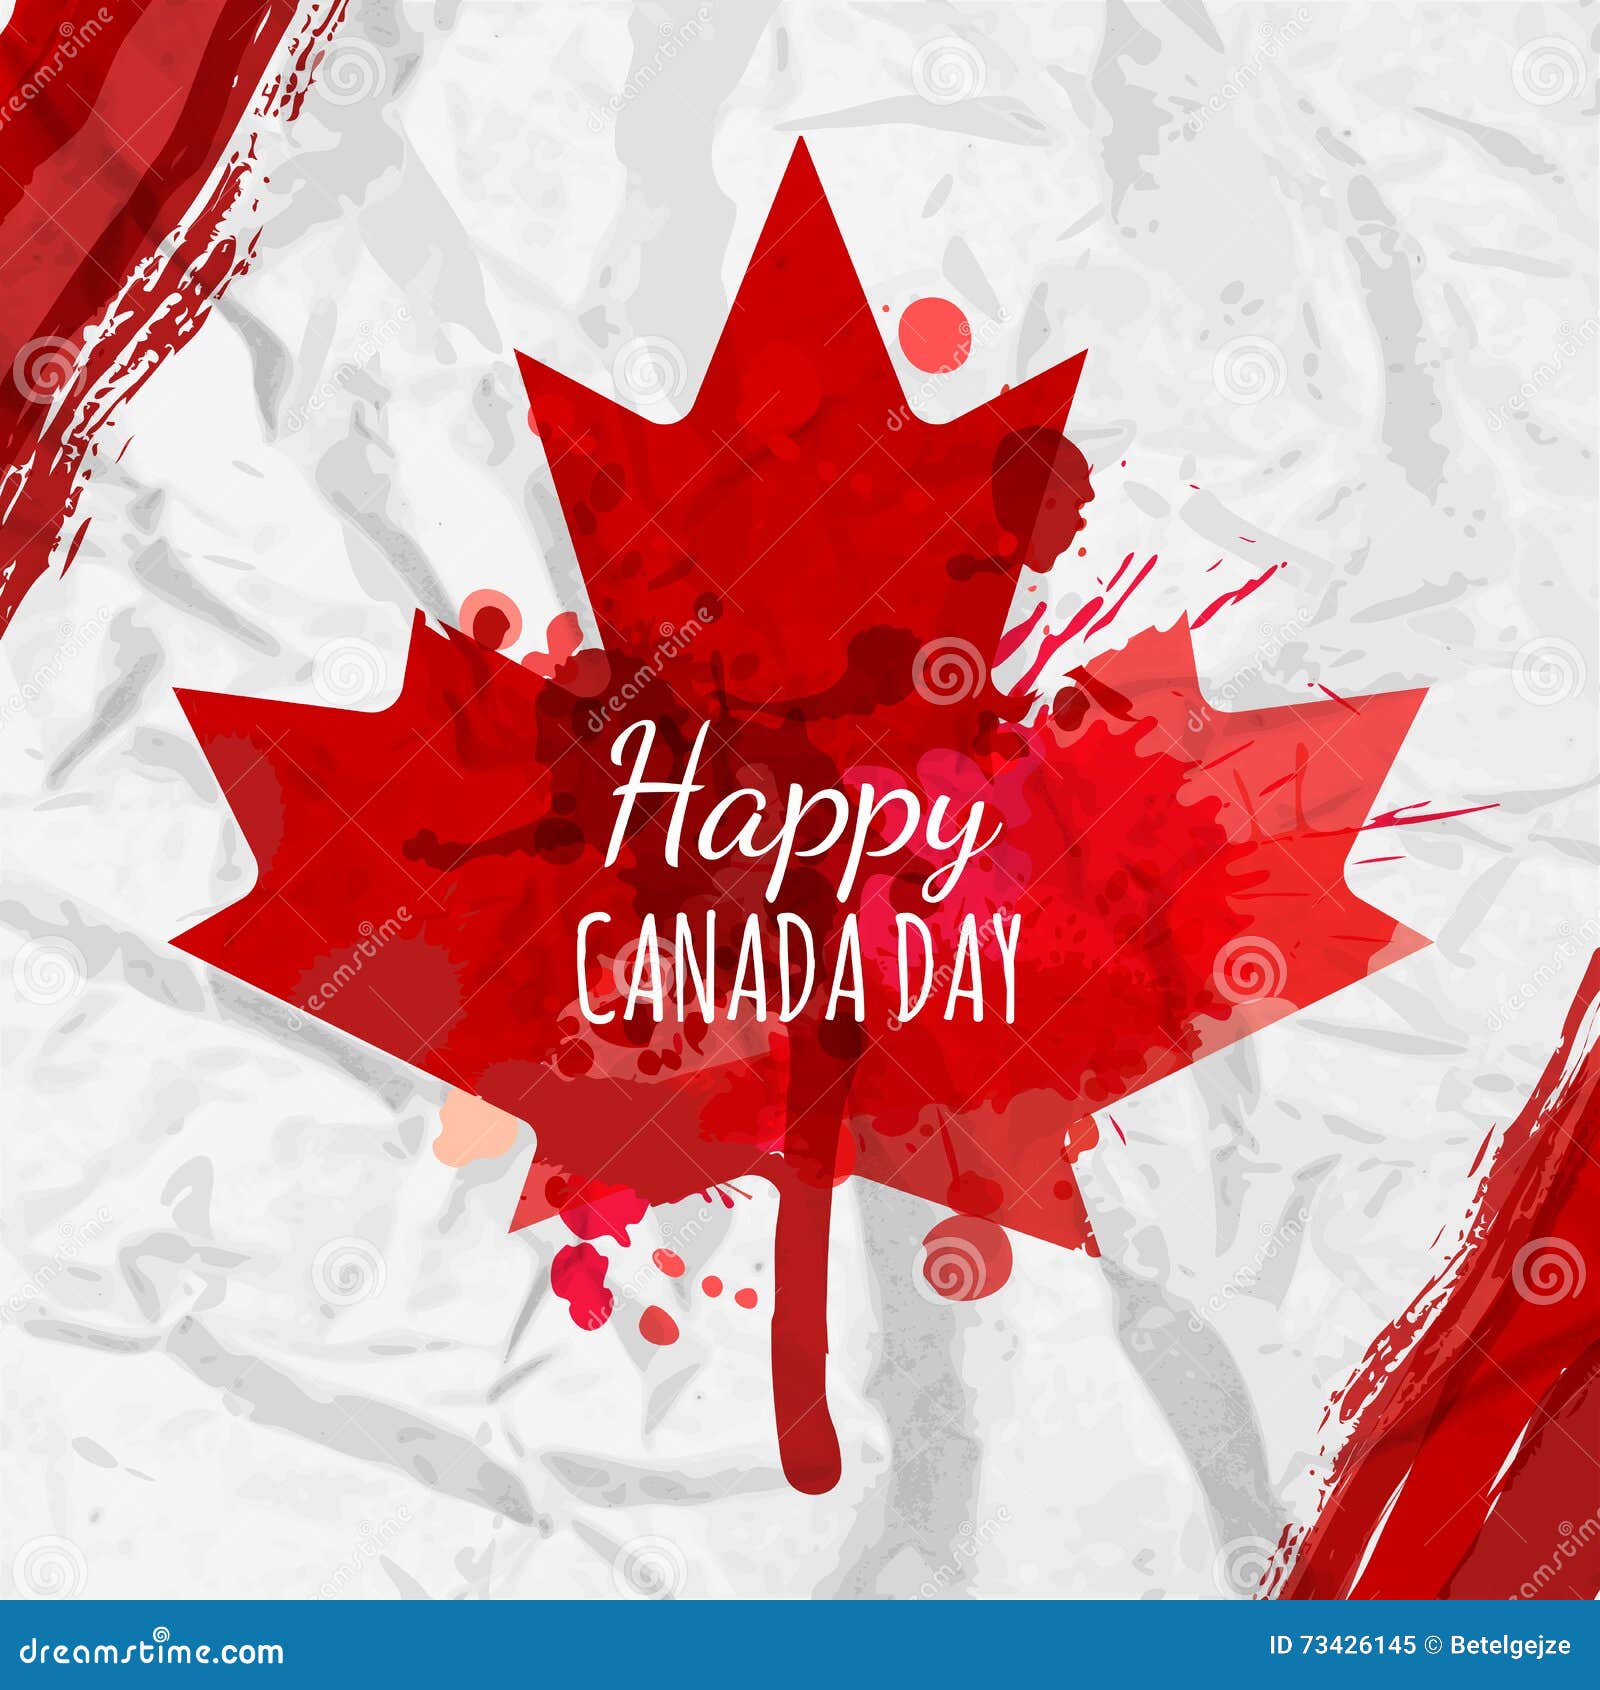 Holiday Poster With Red Canada Maple Leaf Drawn On Crumpled White Paper ...